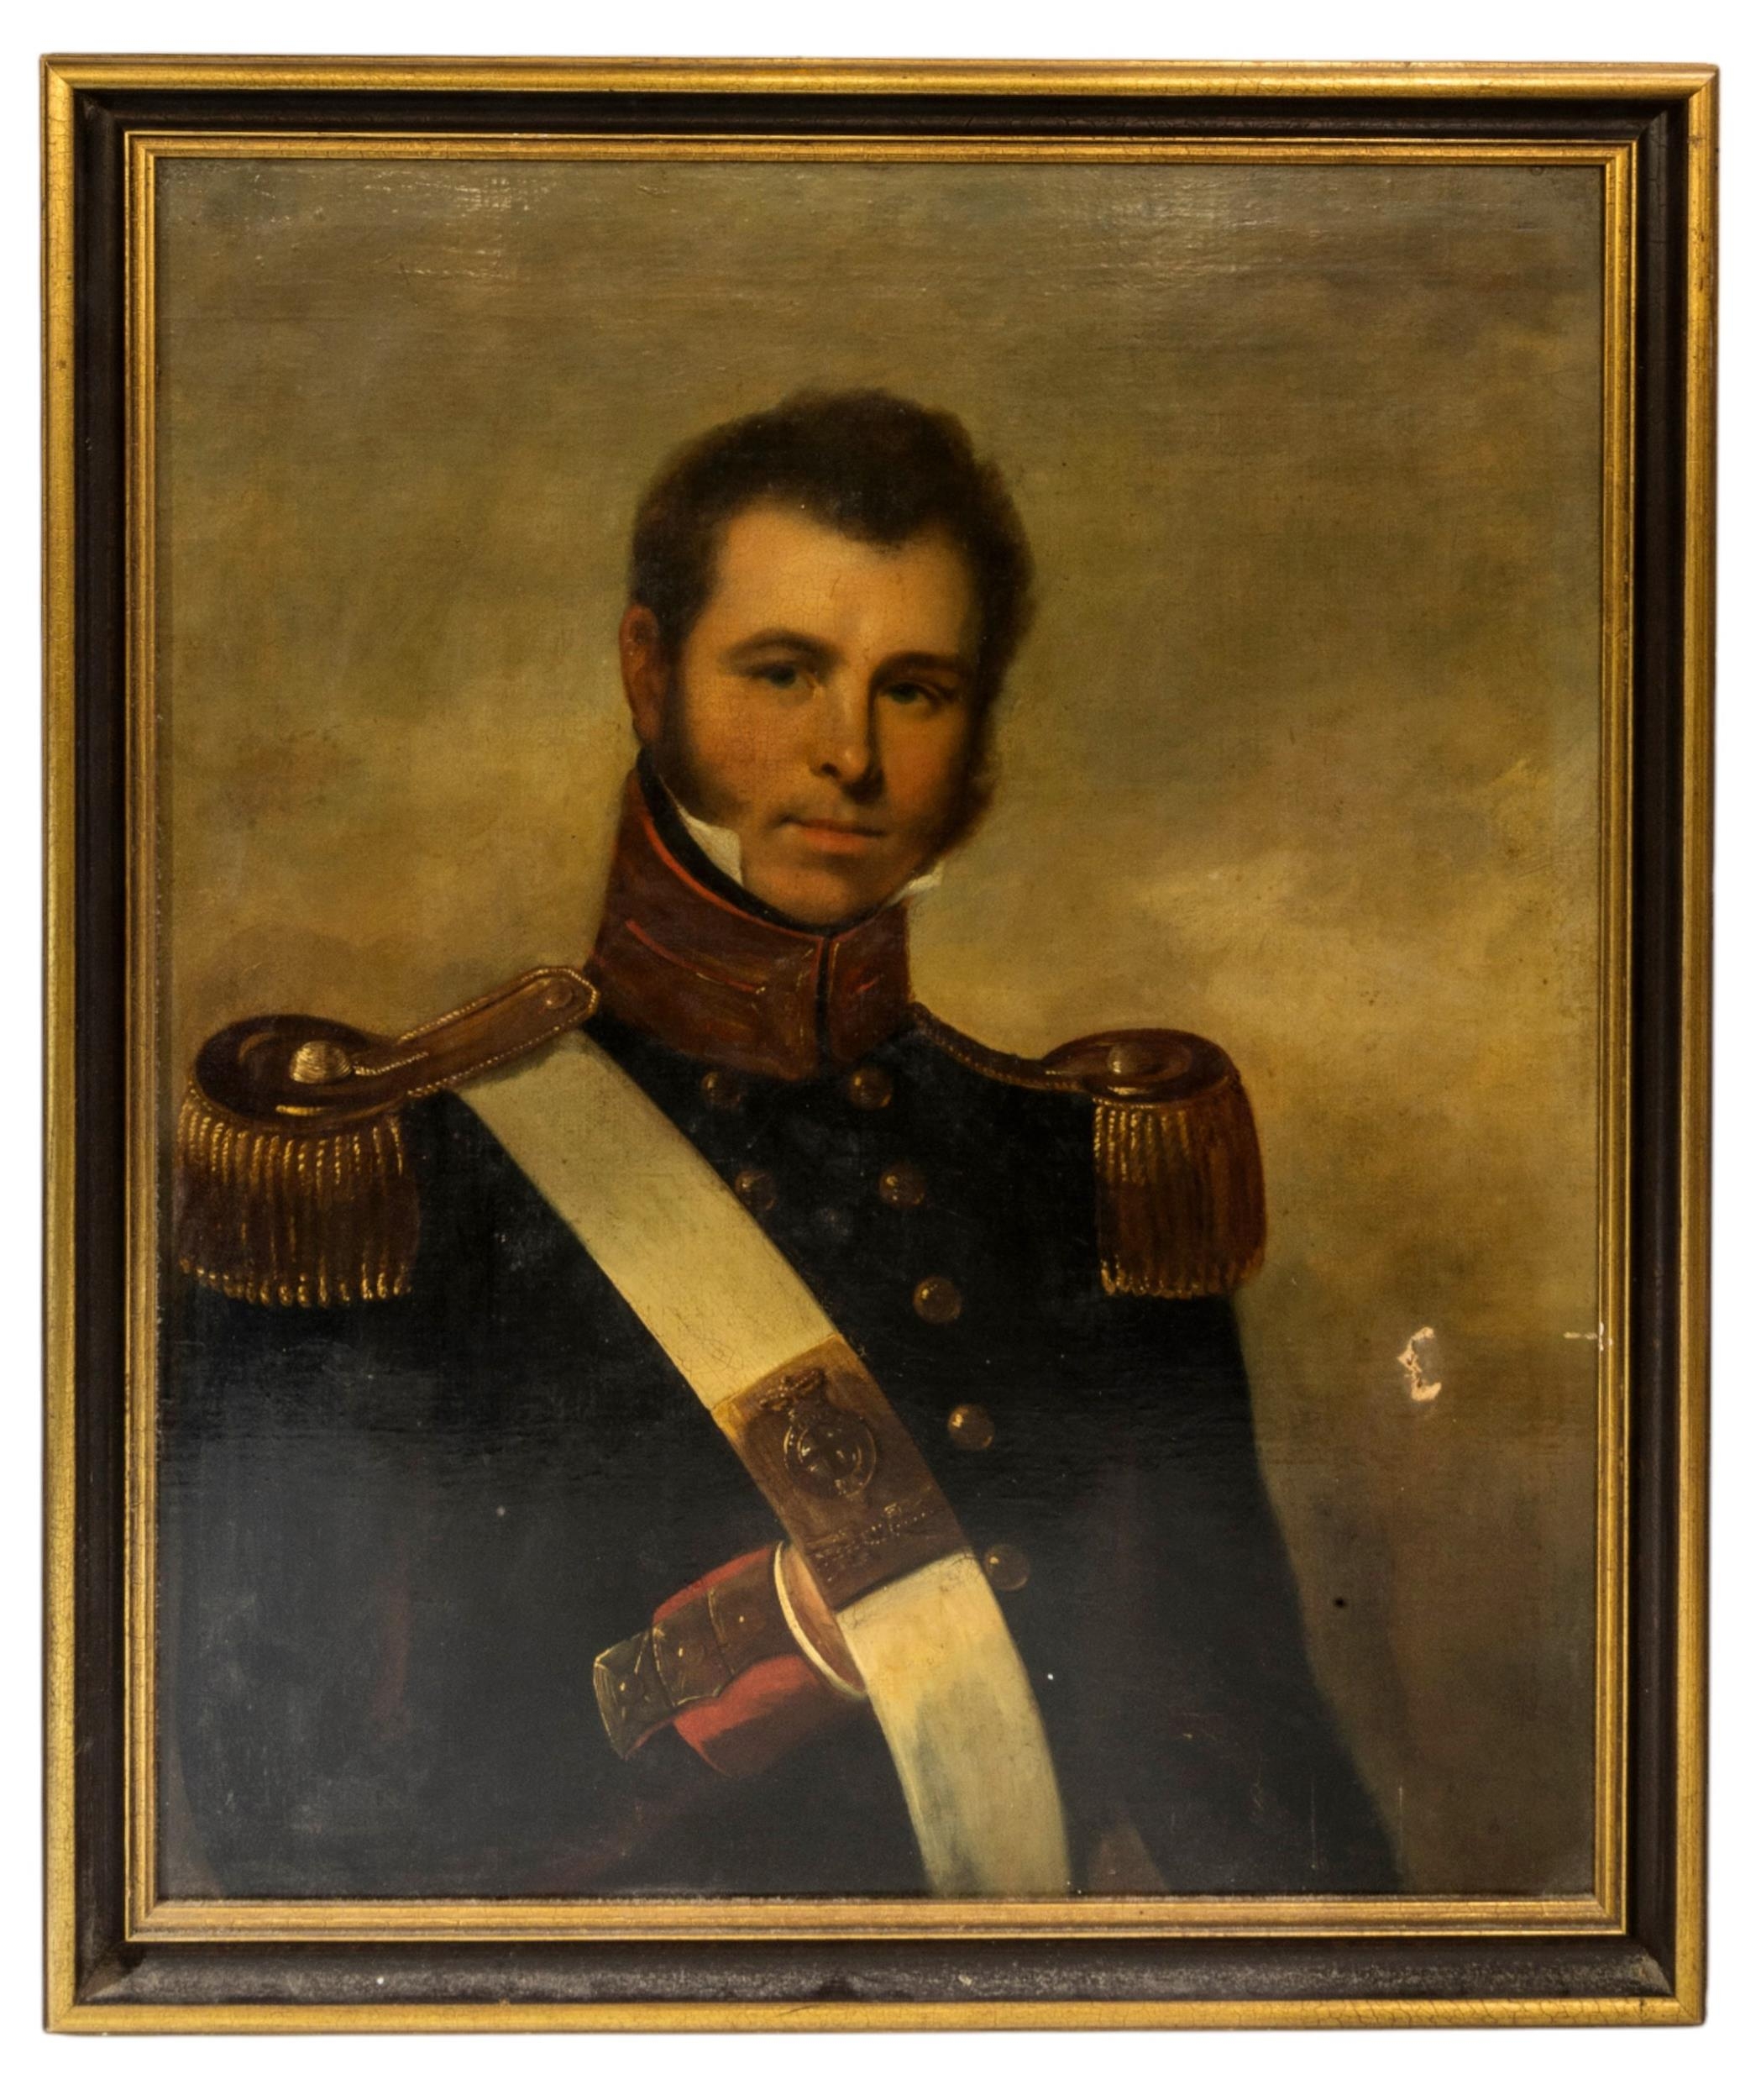 A 19TH CENTURY PORTRAIT OIL PAINTING OF MILITARY FIGURE ON CANVAS, depicting a British general in